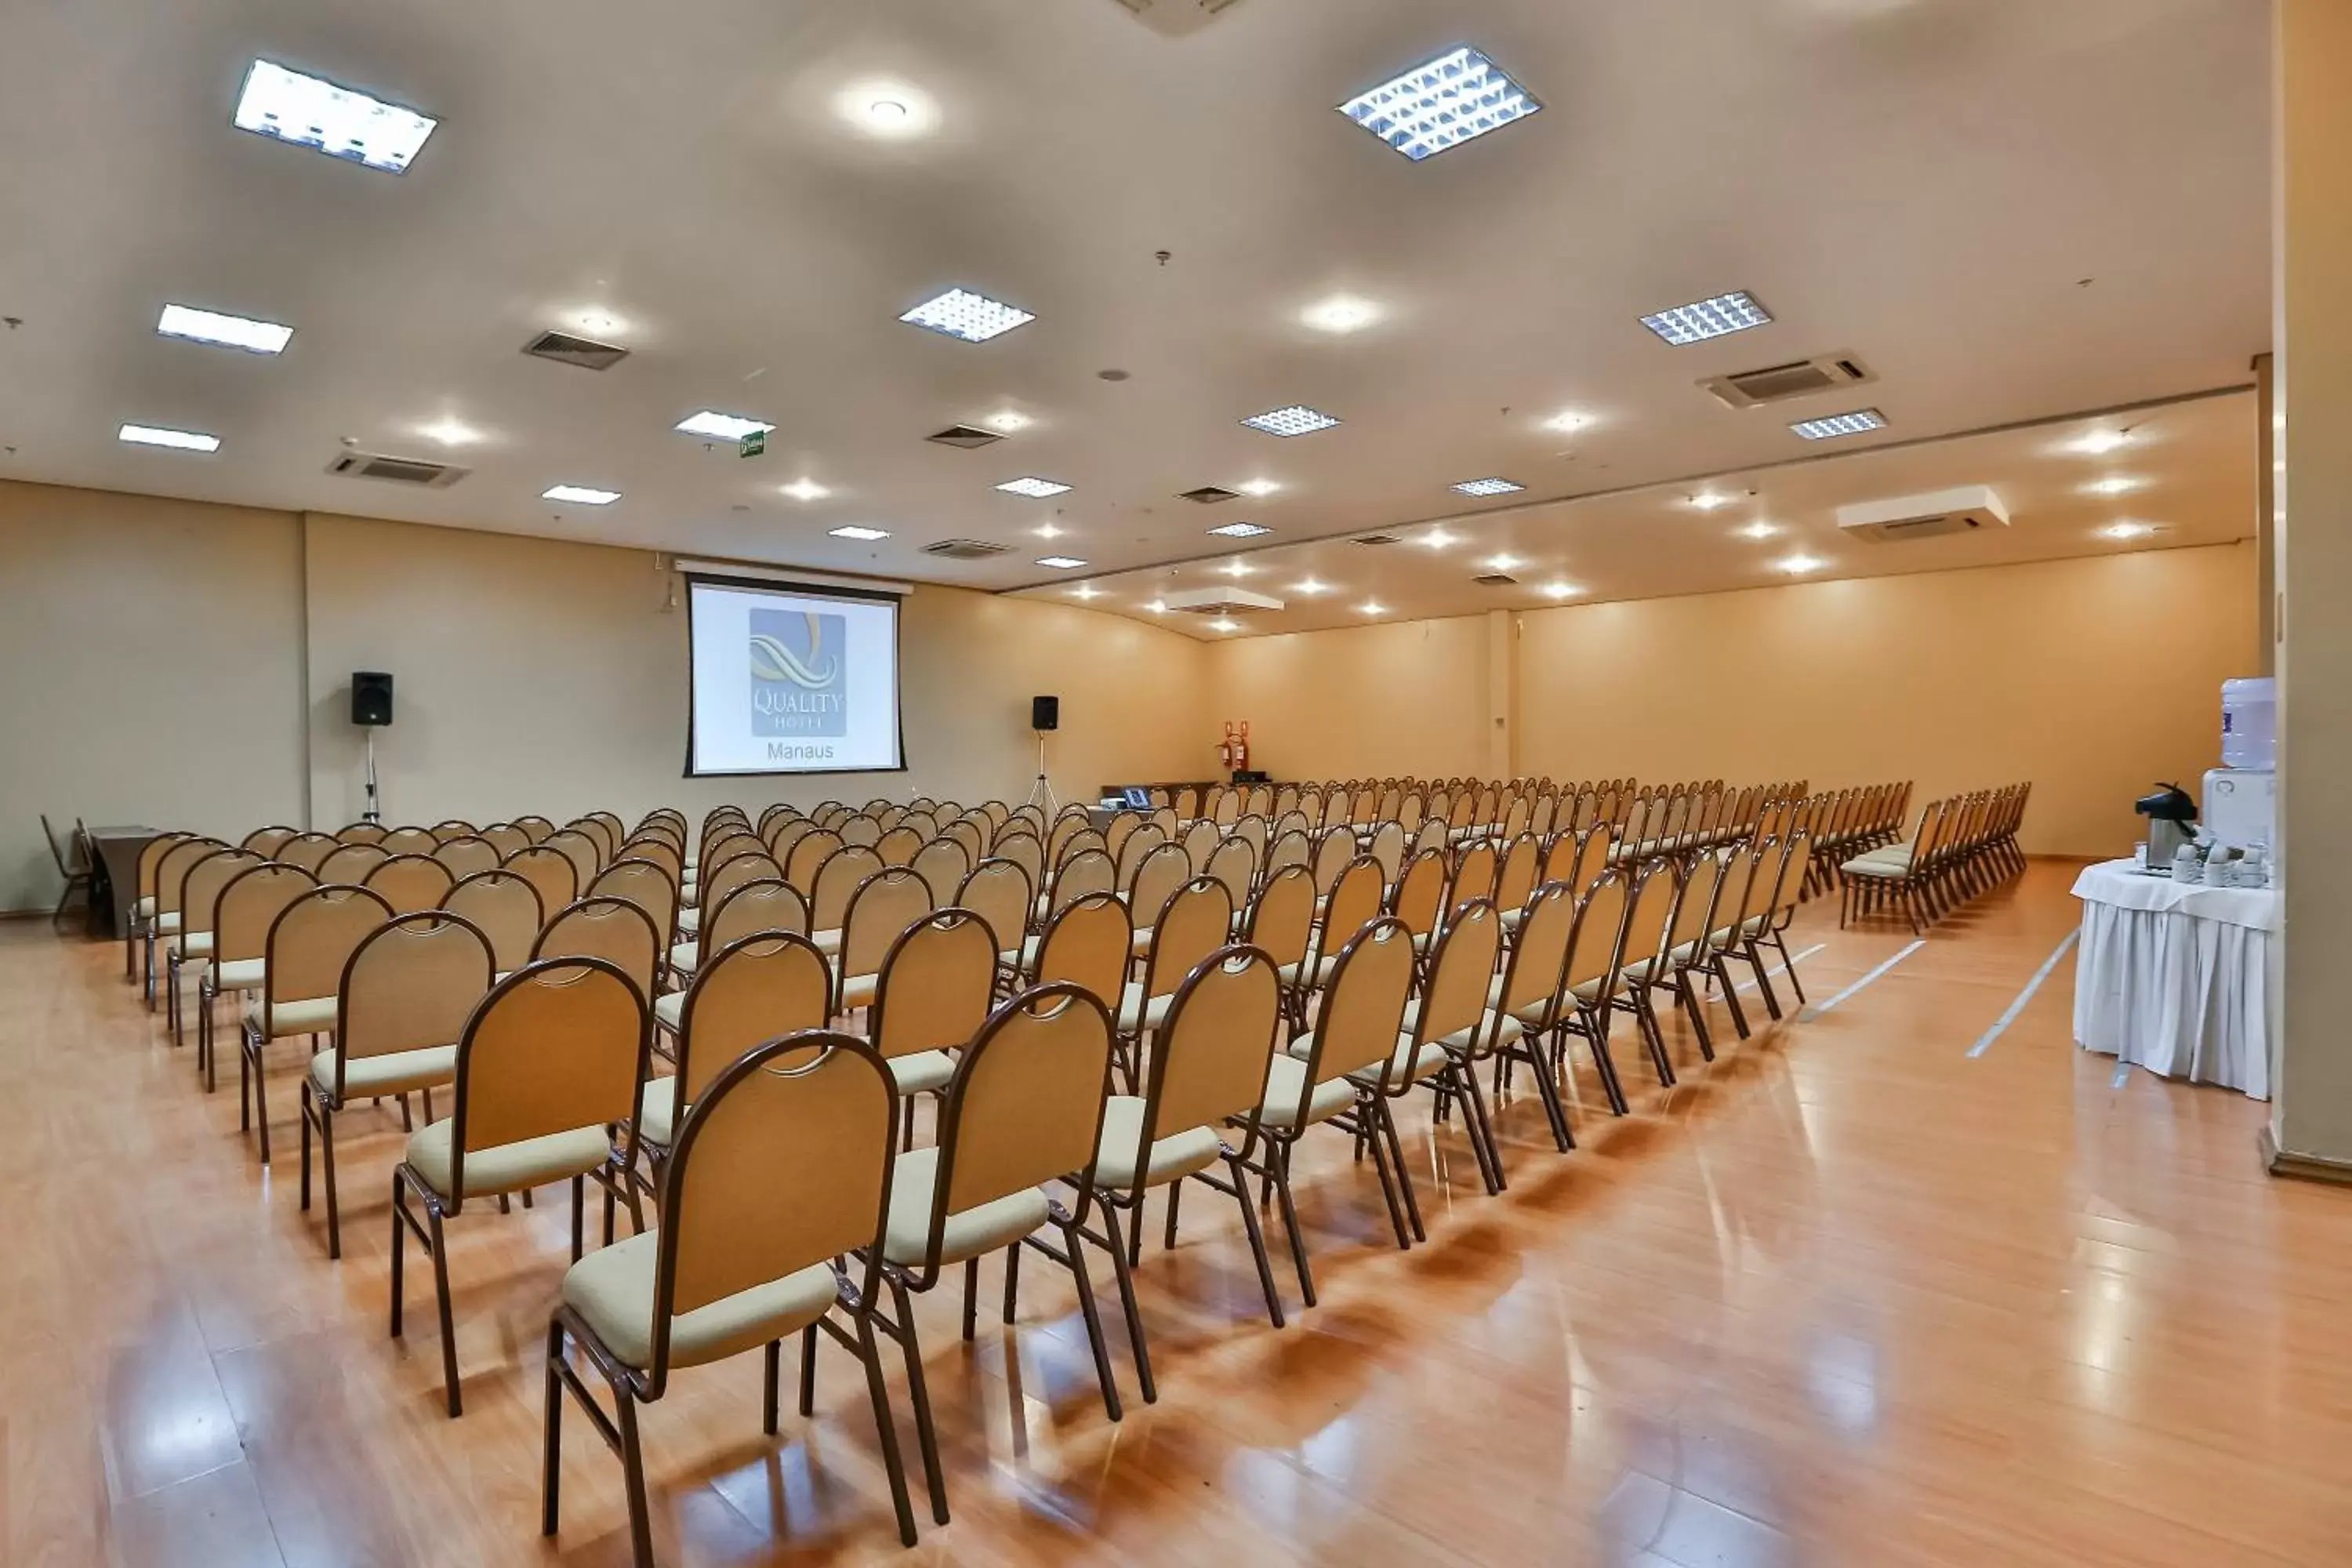 Business facilities in Quality Hotel Manaus